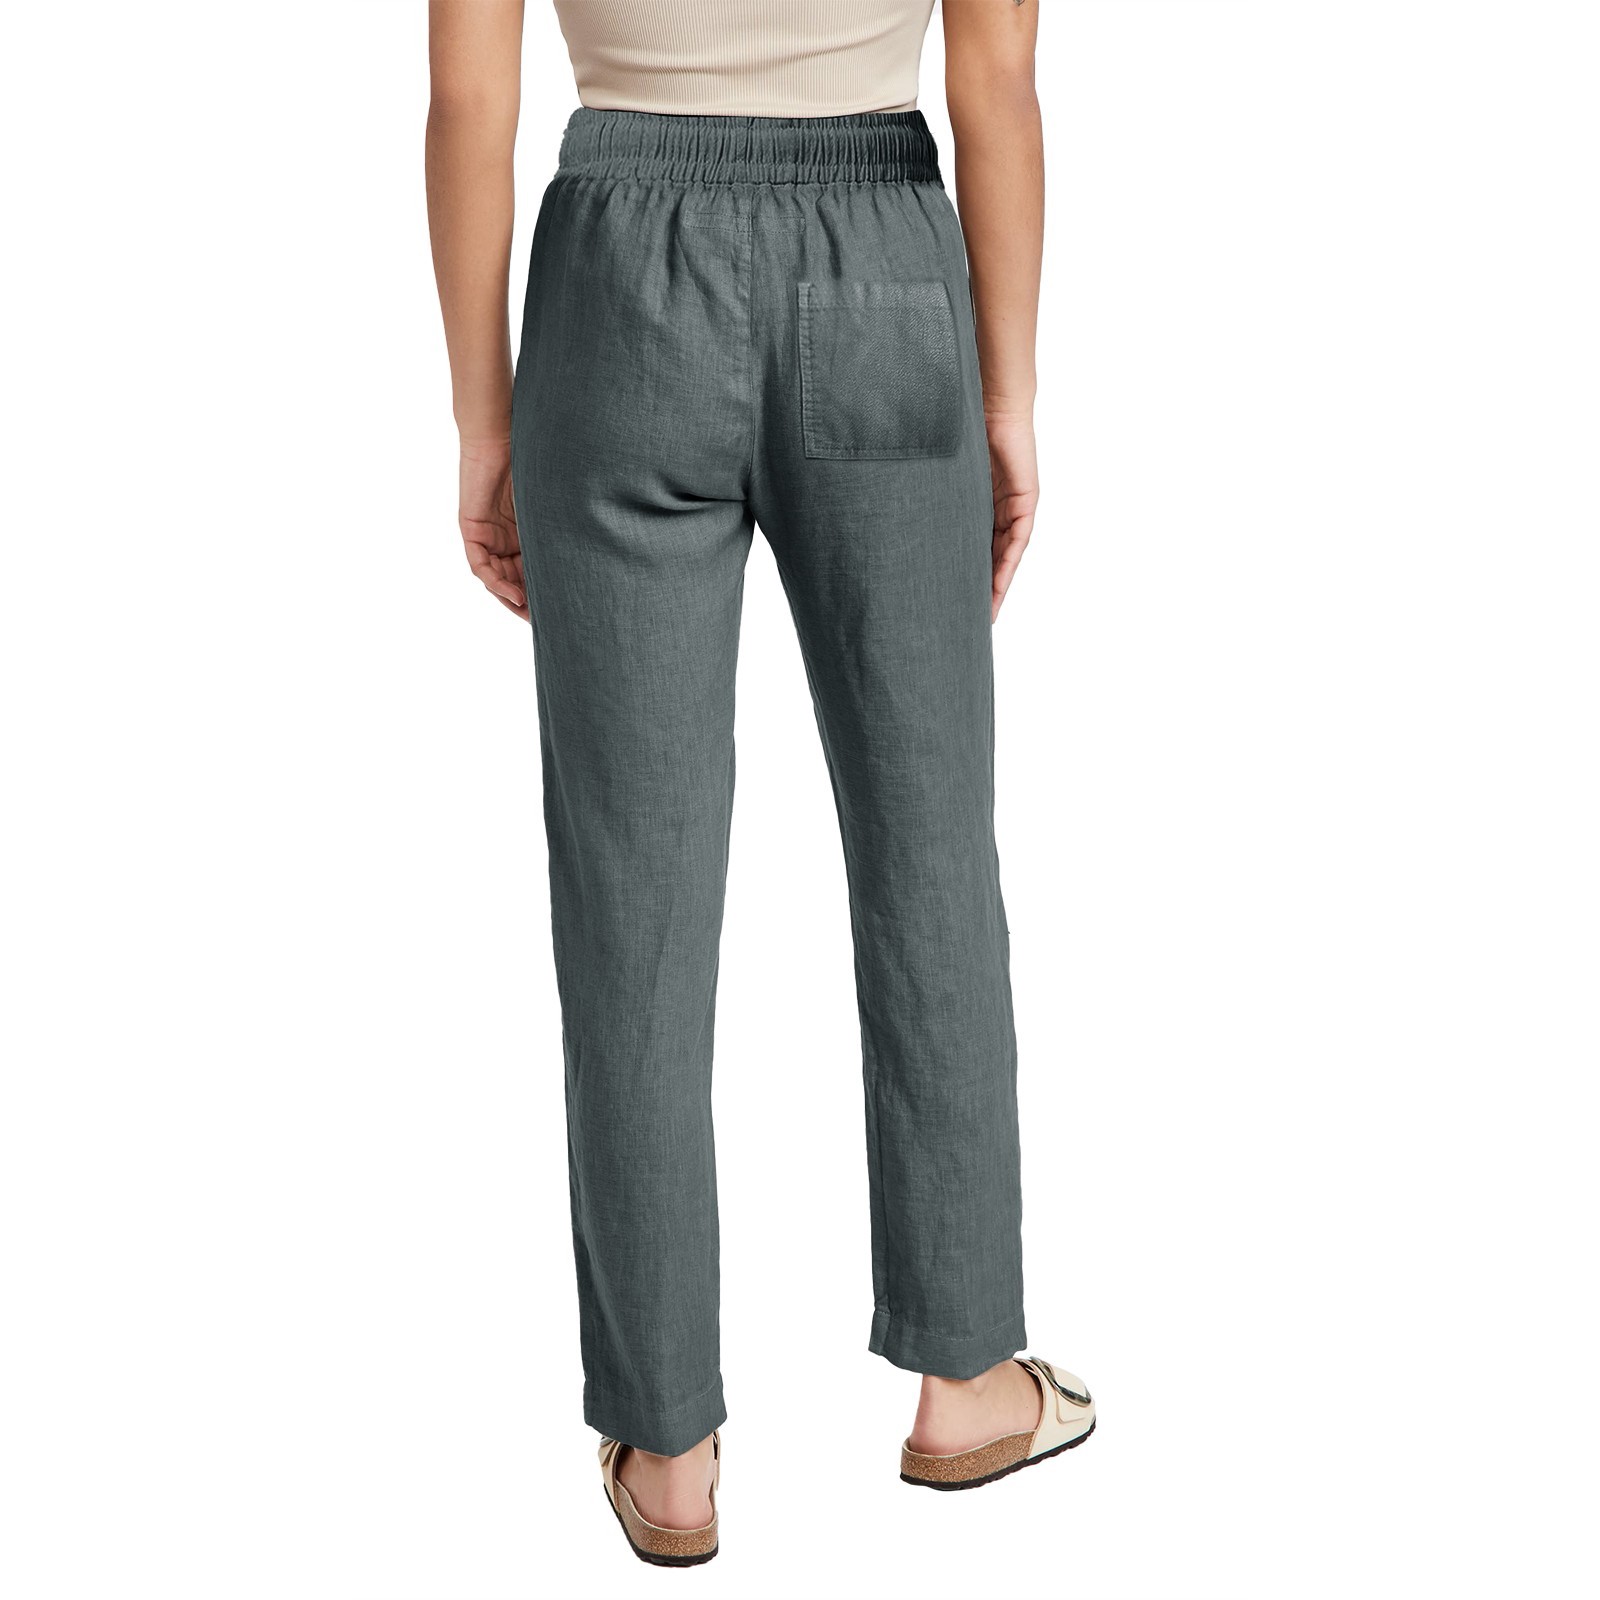 TANGNADE Women's Casual Pants Solid Cotton and with Pocket Long, Gray S ...